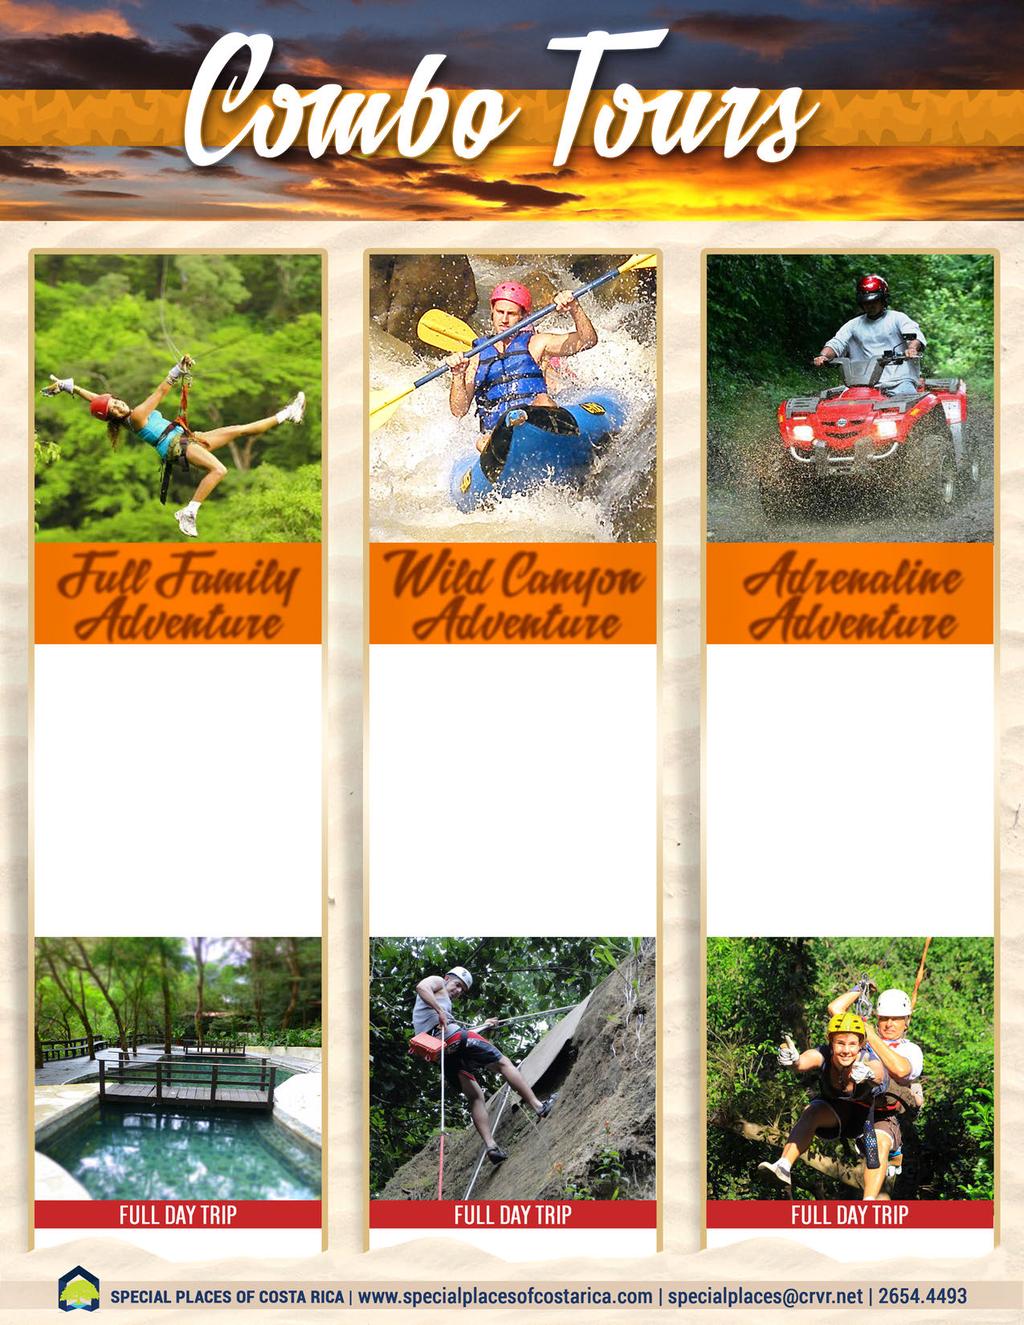 This is your perfect day with fun for the whole family We will do: Horseback Riding Zip-Lining (10 cables) Giant Waterslide (500yds) Volcanic Hot Springs Perfect Day!